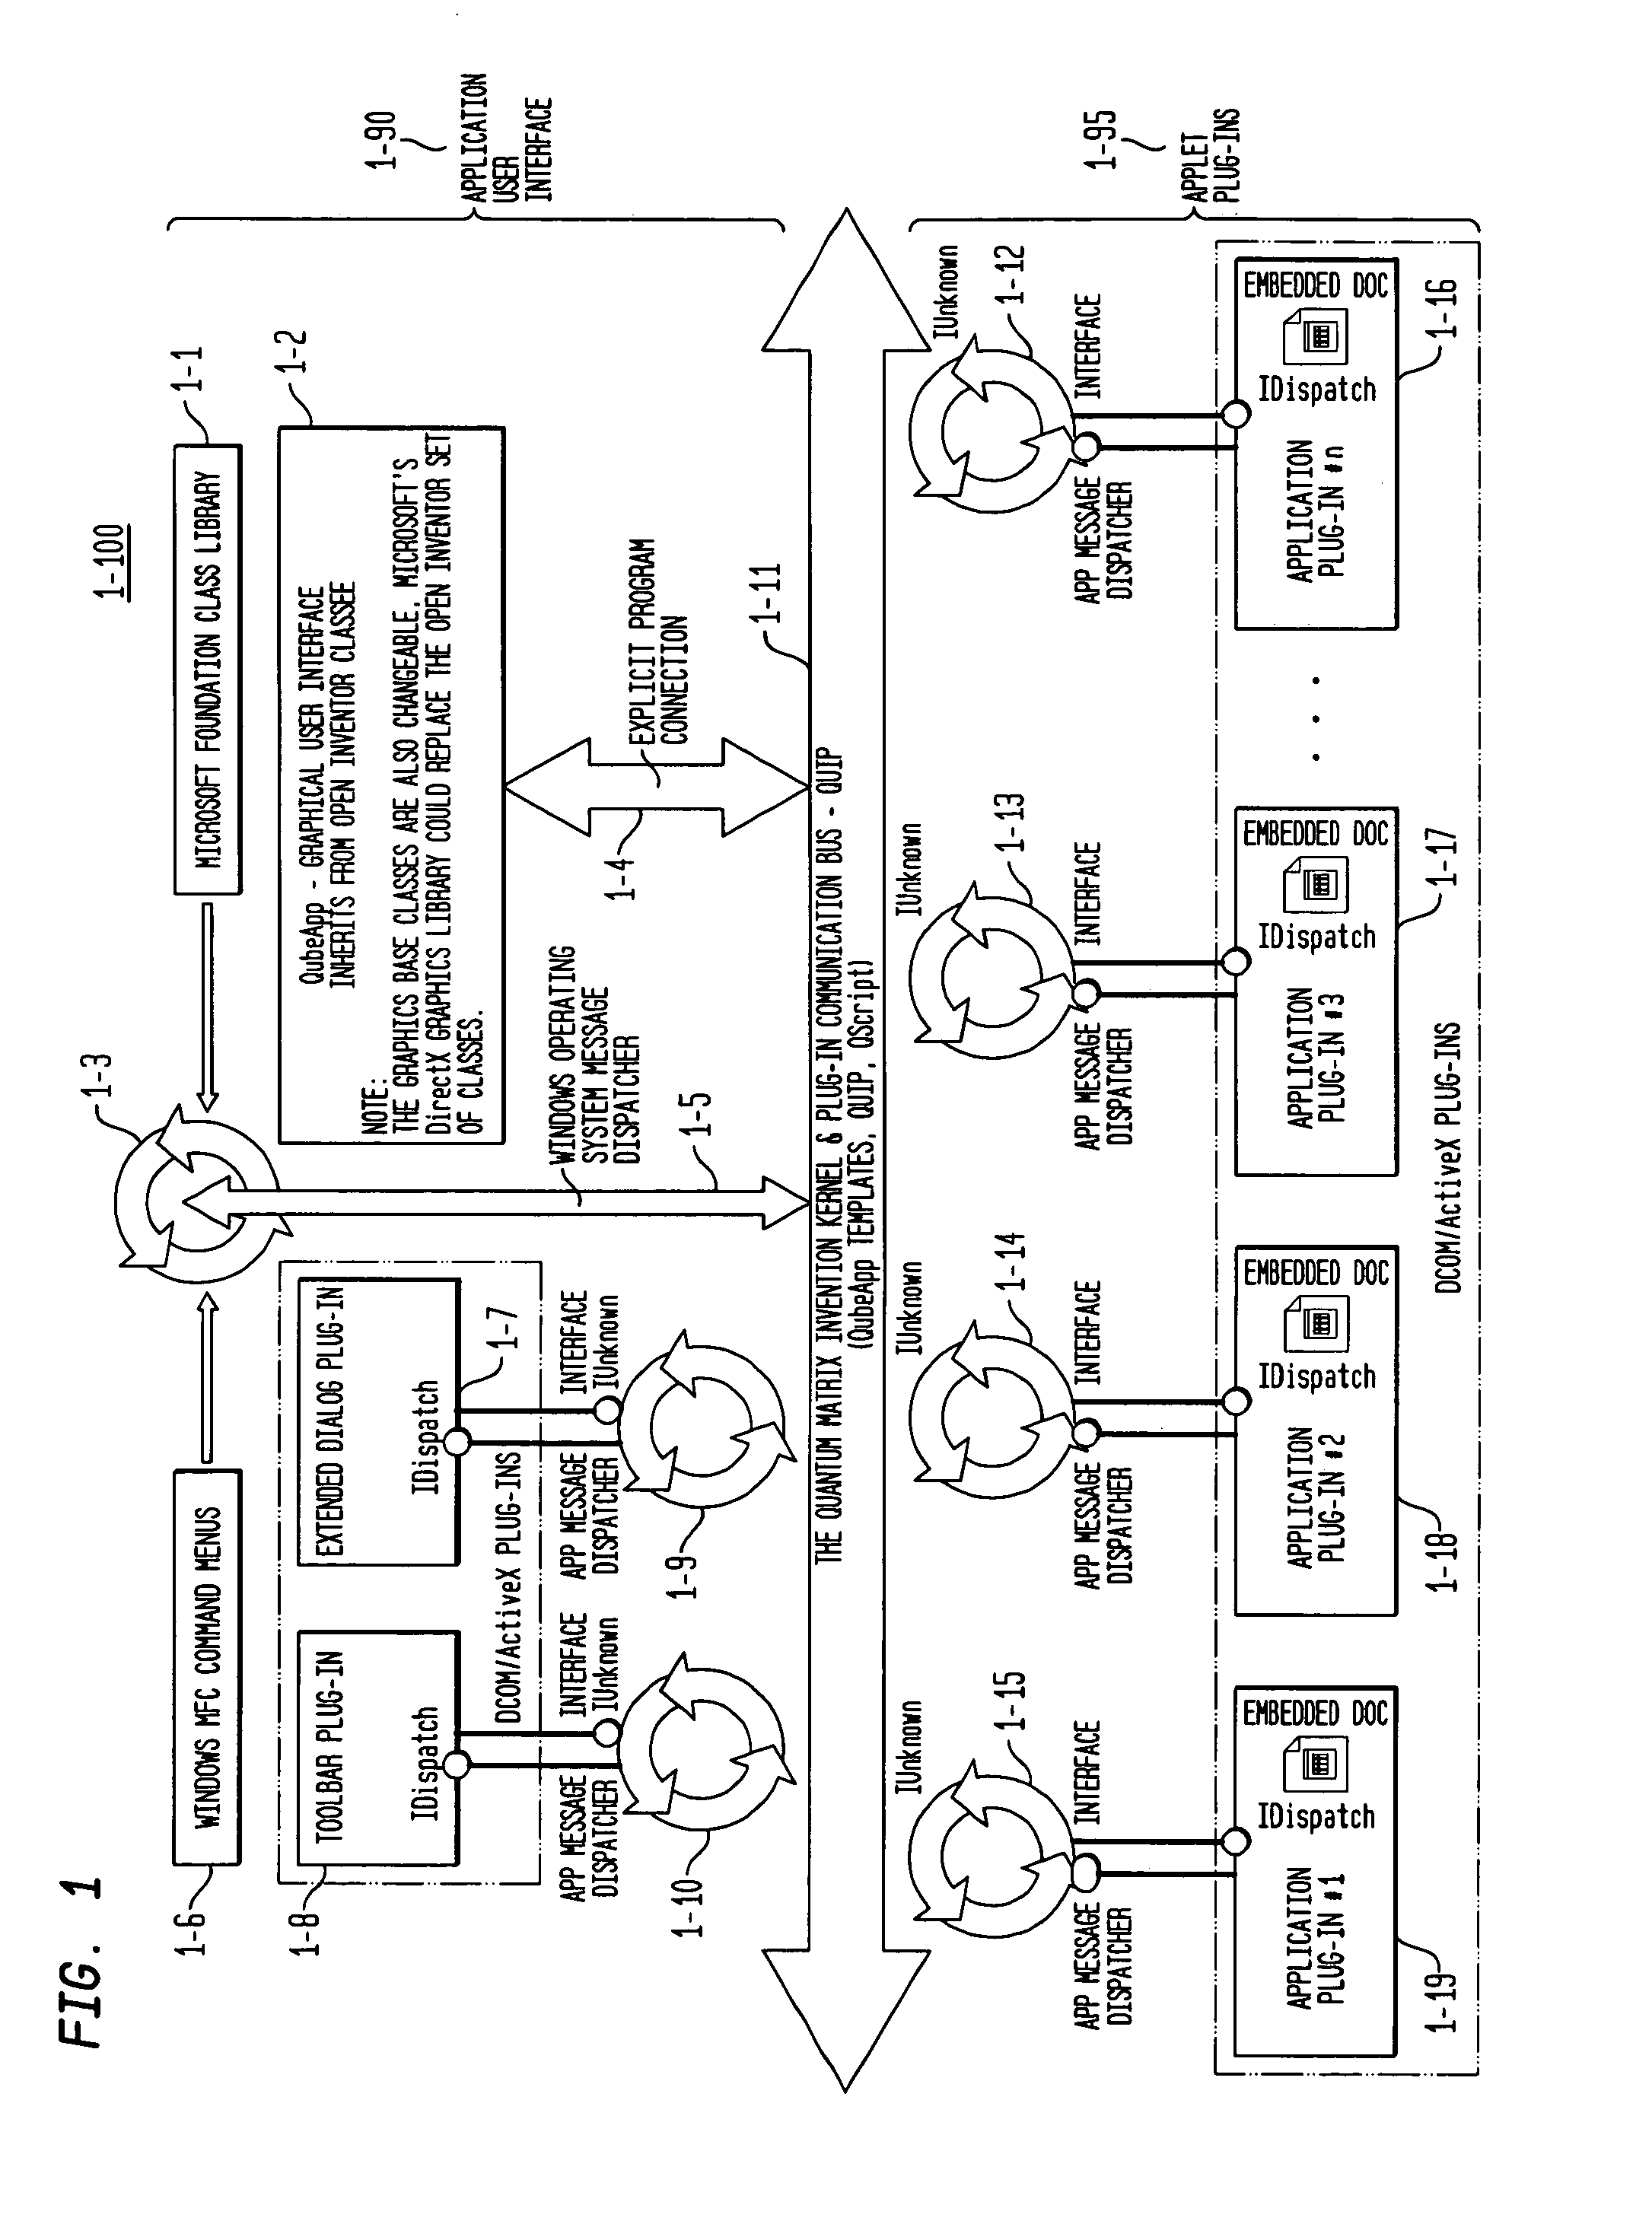 System and Method for Muulti-Dimensional Organization, Management, and Manipulation of Remote Data